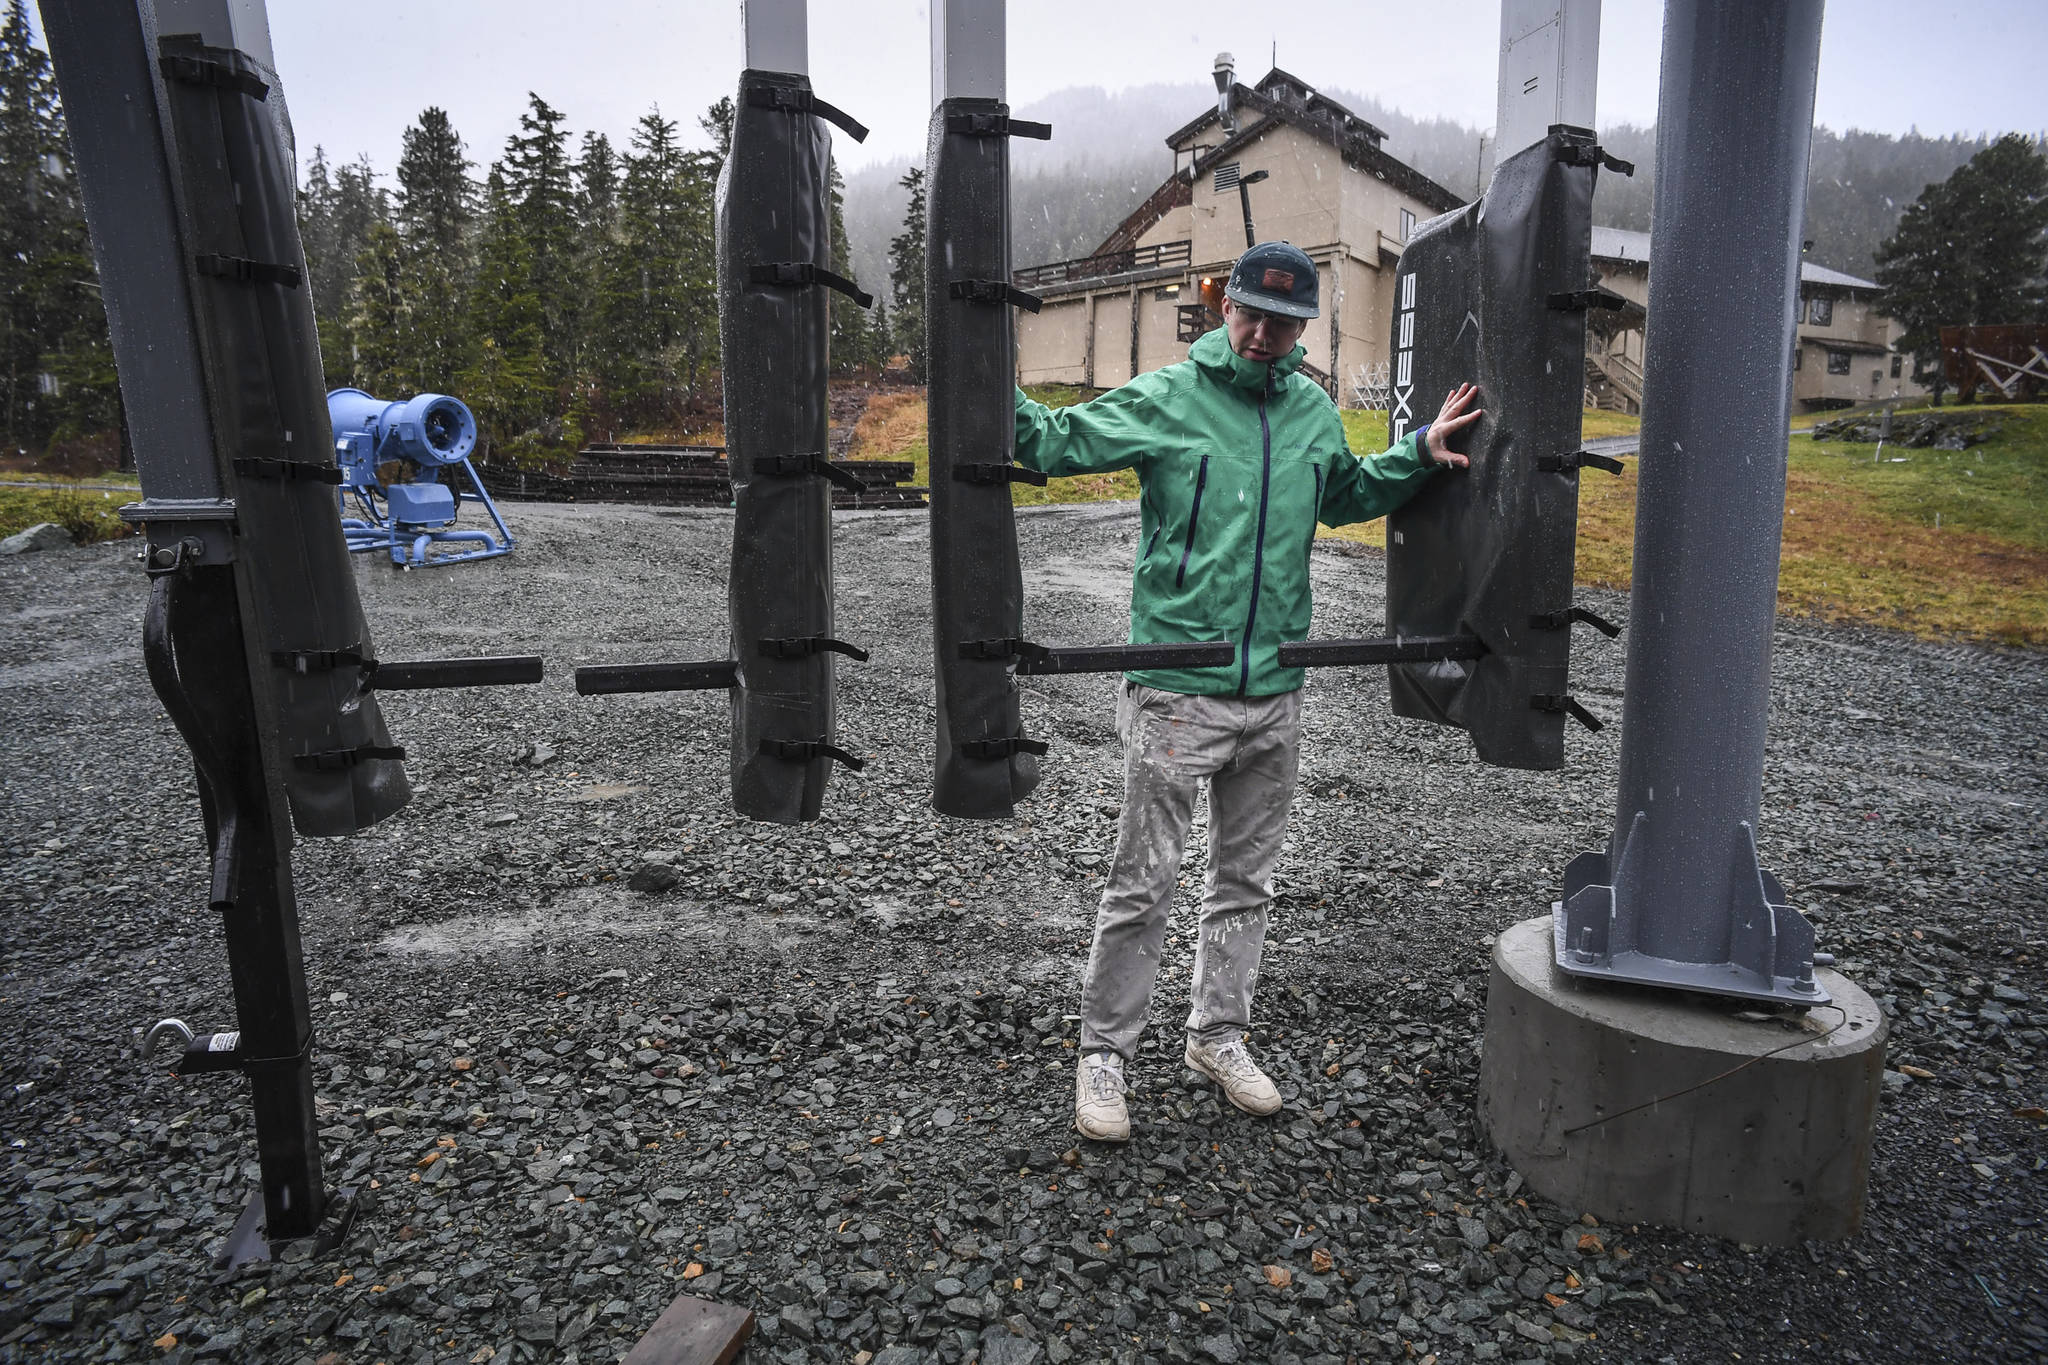 Charlie Herrington, Marketing Manager for the Eaglecrest Ski Area, shows off new radio-frequency identification gates on Tuesday, Oct. 29, 2019, that skiers will use this season to access the chairlifts. (Michael Penn | Juneau Empire)